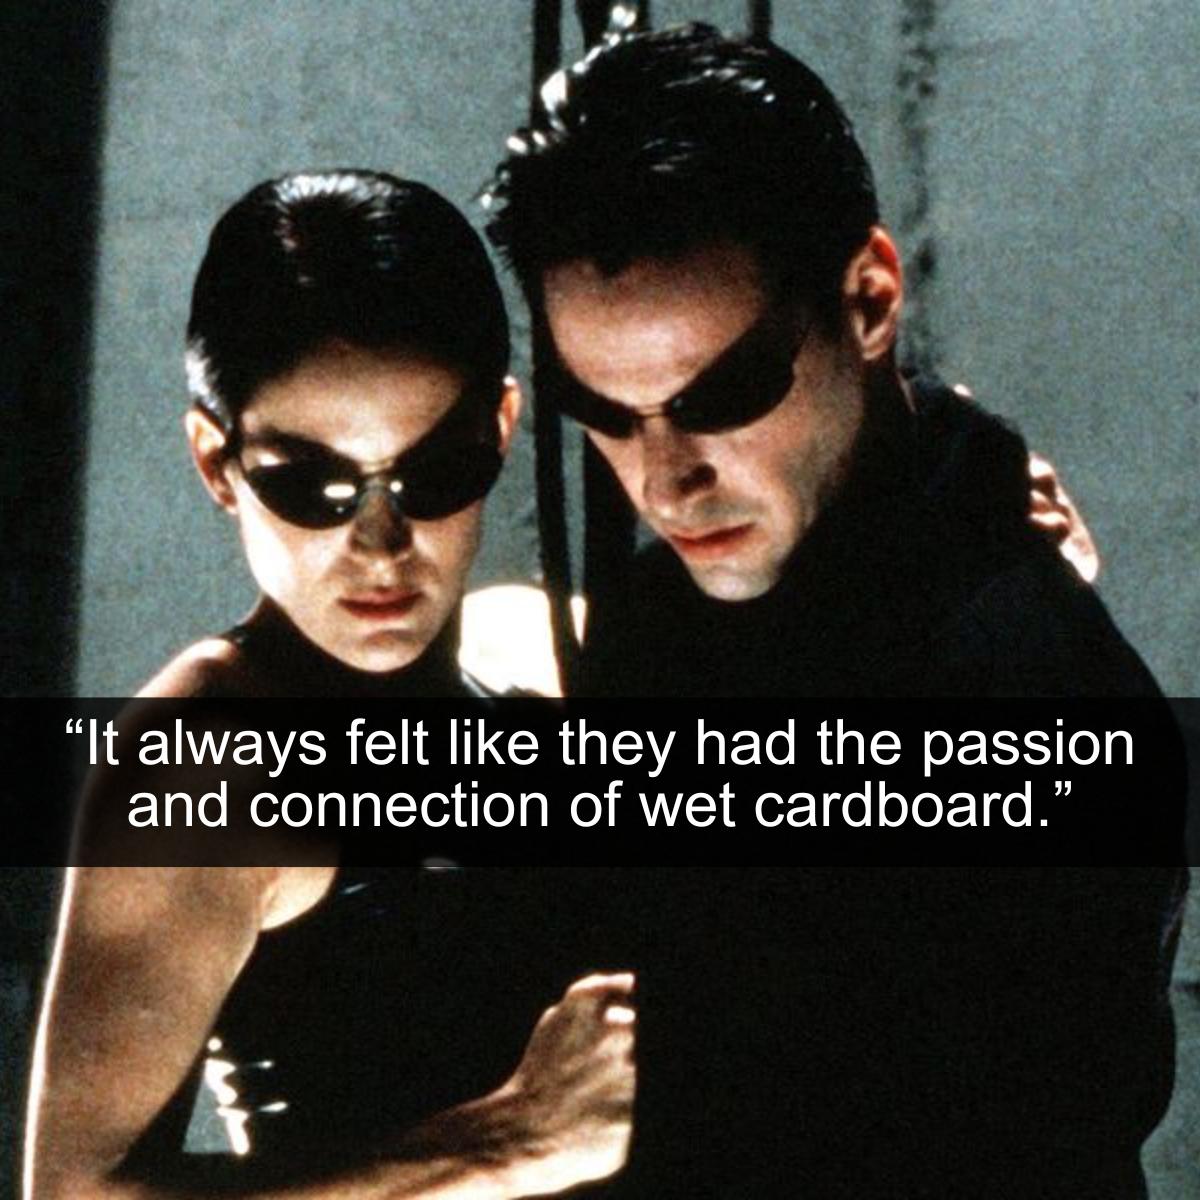 <p>The Matrix is an excellent collection of movies if you really want to scramble your brain and make you doubt reality. Maybe we are all living in a simulation created by machines that humans created. If that's the case, then nothing really matters. That even includes love. However, even if love isn't real, Neo and Trinity's relationship could have at least been a little bit more believable. Perhaps they needed an upgrade to the system.</p> <p>Even though these two freedom fighters were constantly in a state of war, their more intimate moments felt extremely cold and scripted. It was almost as if they were just going through the motions to prove to each other that they were human. Maybe Zion just wasn't a romantic enough environment for them to really express their love.</p>